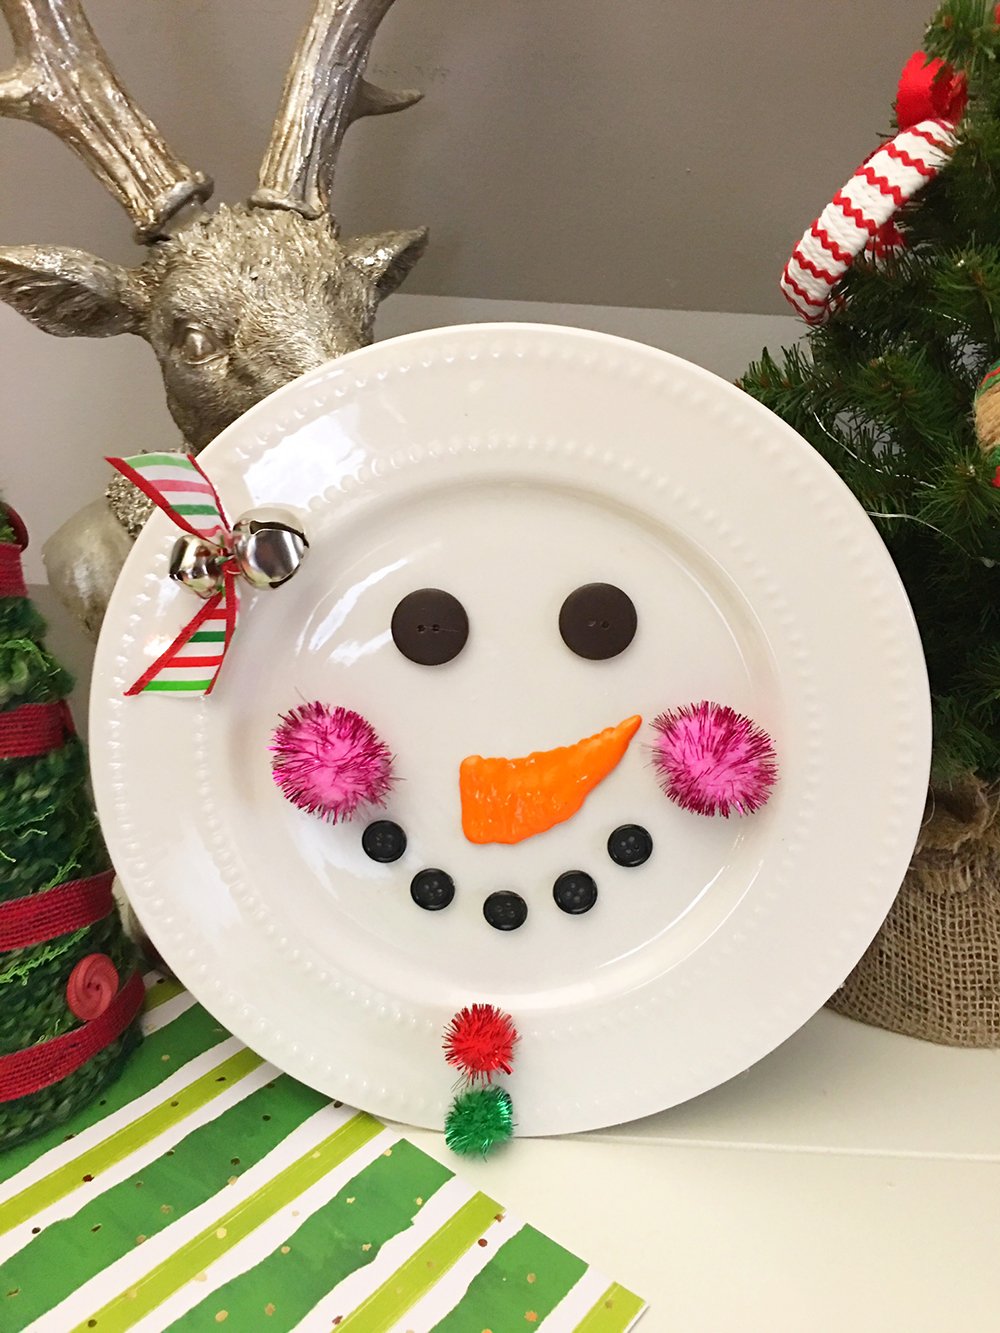 DIY Christmas Decorative plate is an adorable addition to any holiday decor! So easy and fun to make with simple supplies from the Dollar Store!